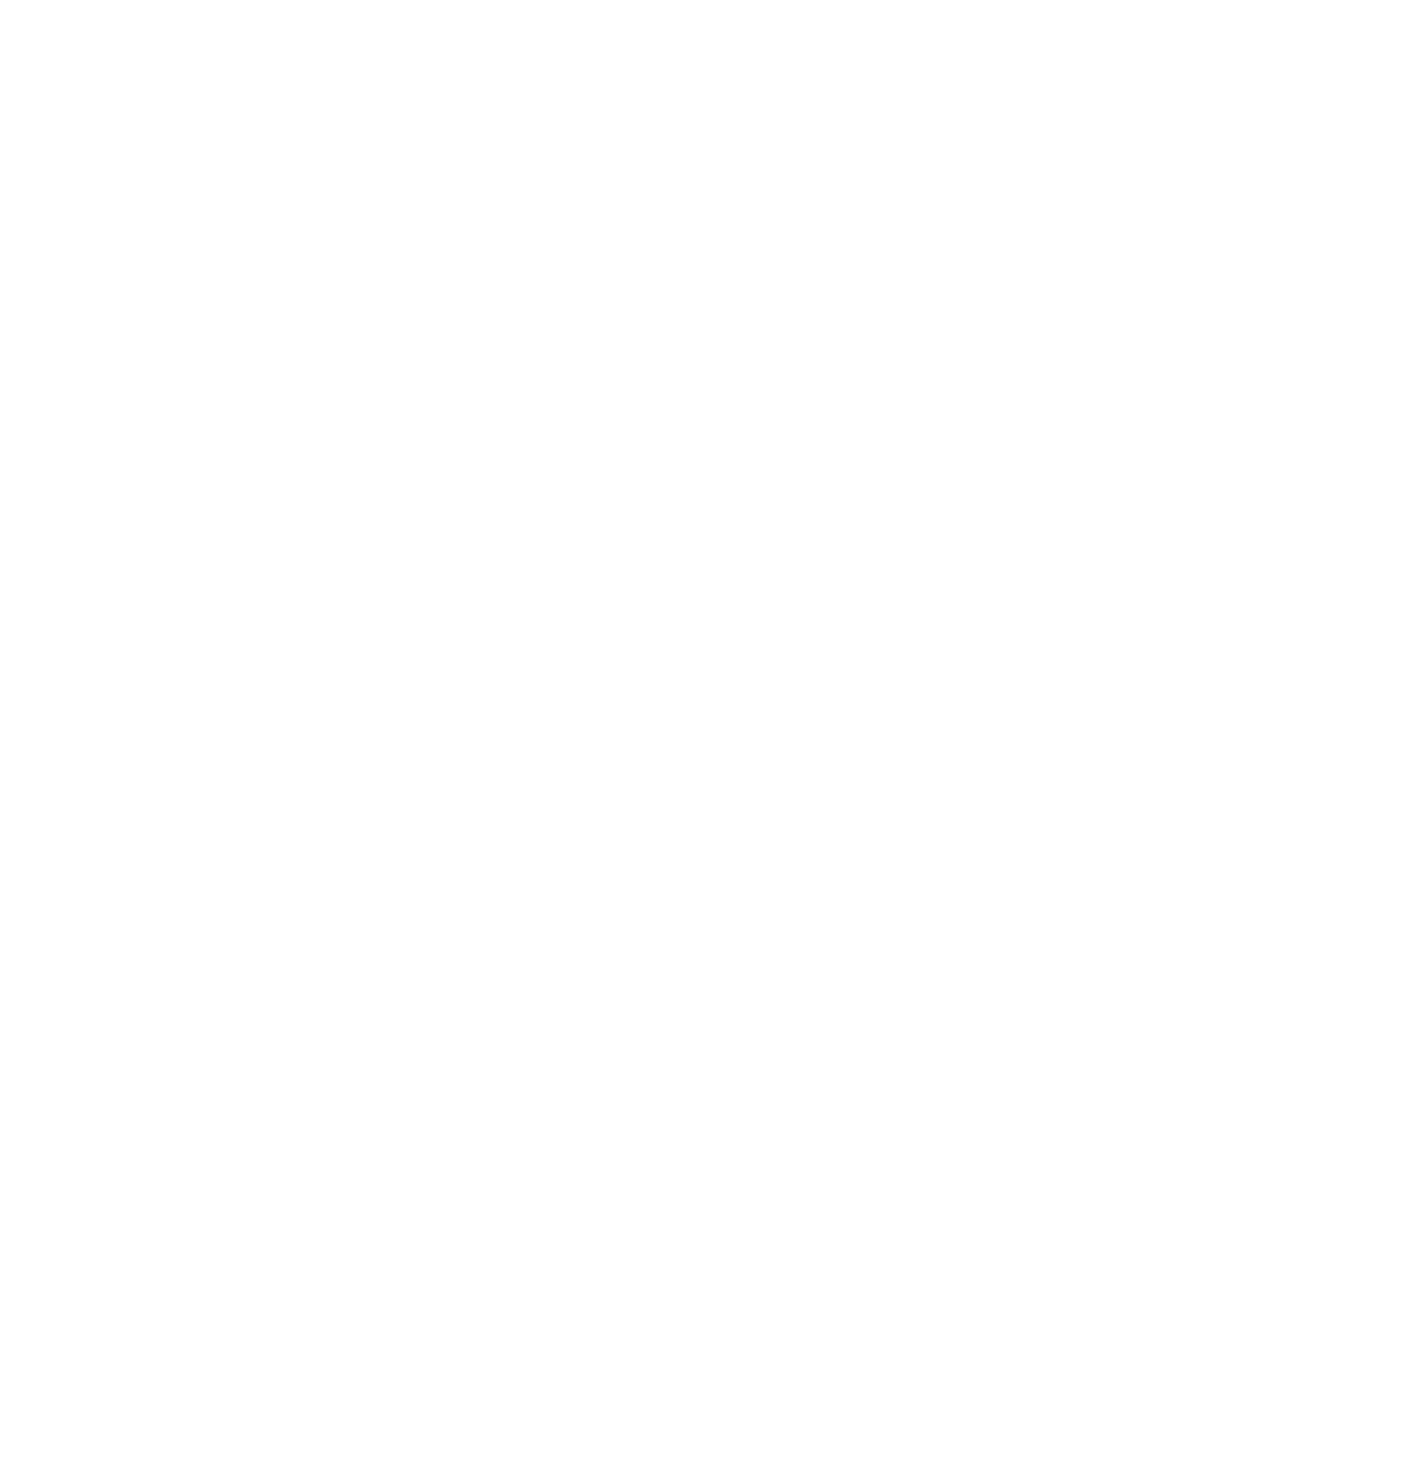 BLIND_title_WH